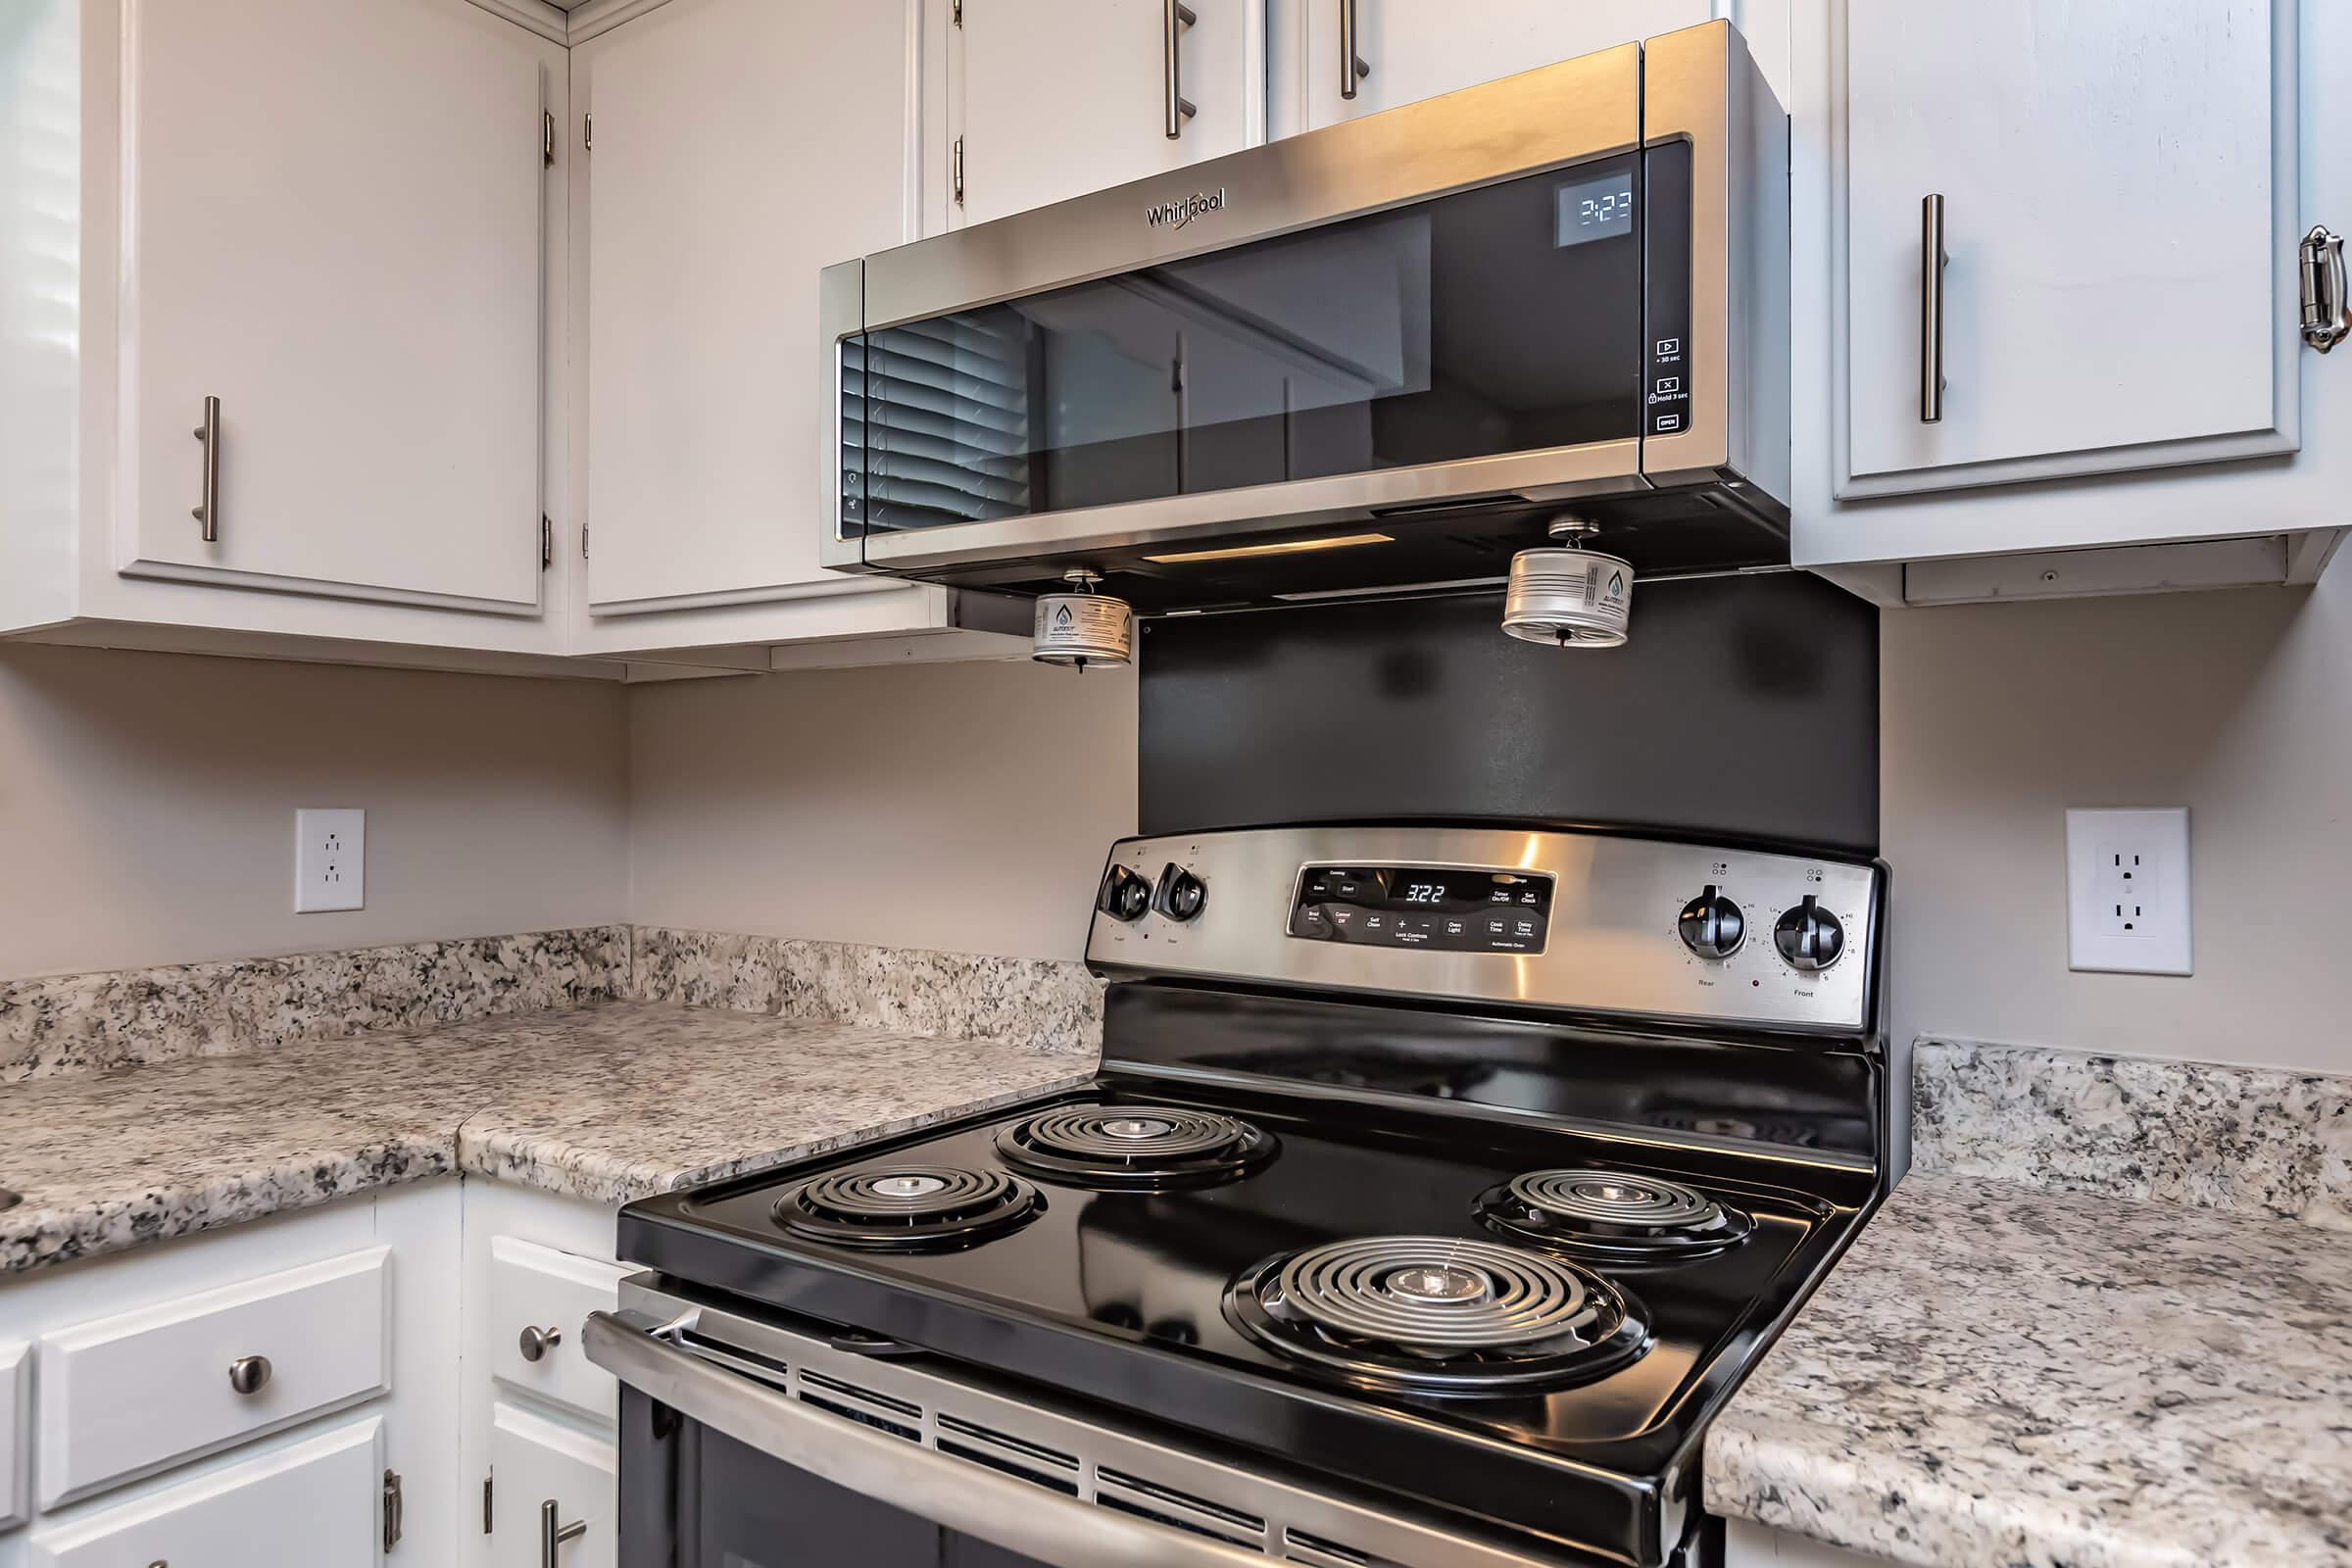 Microwave and range in kitchen of two bedroom townhome